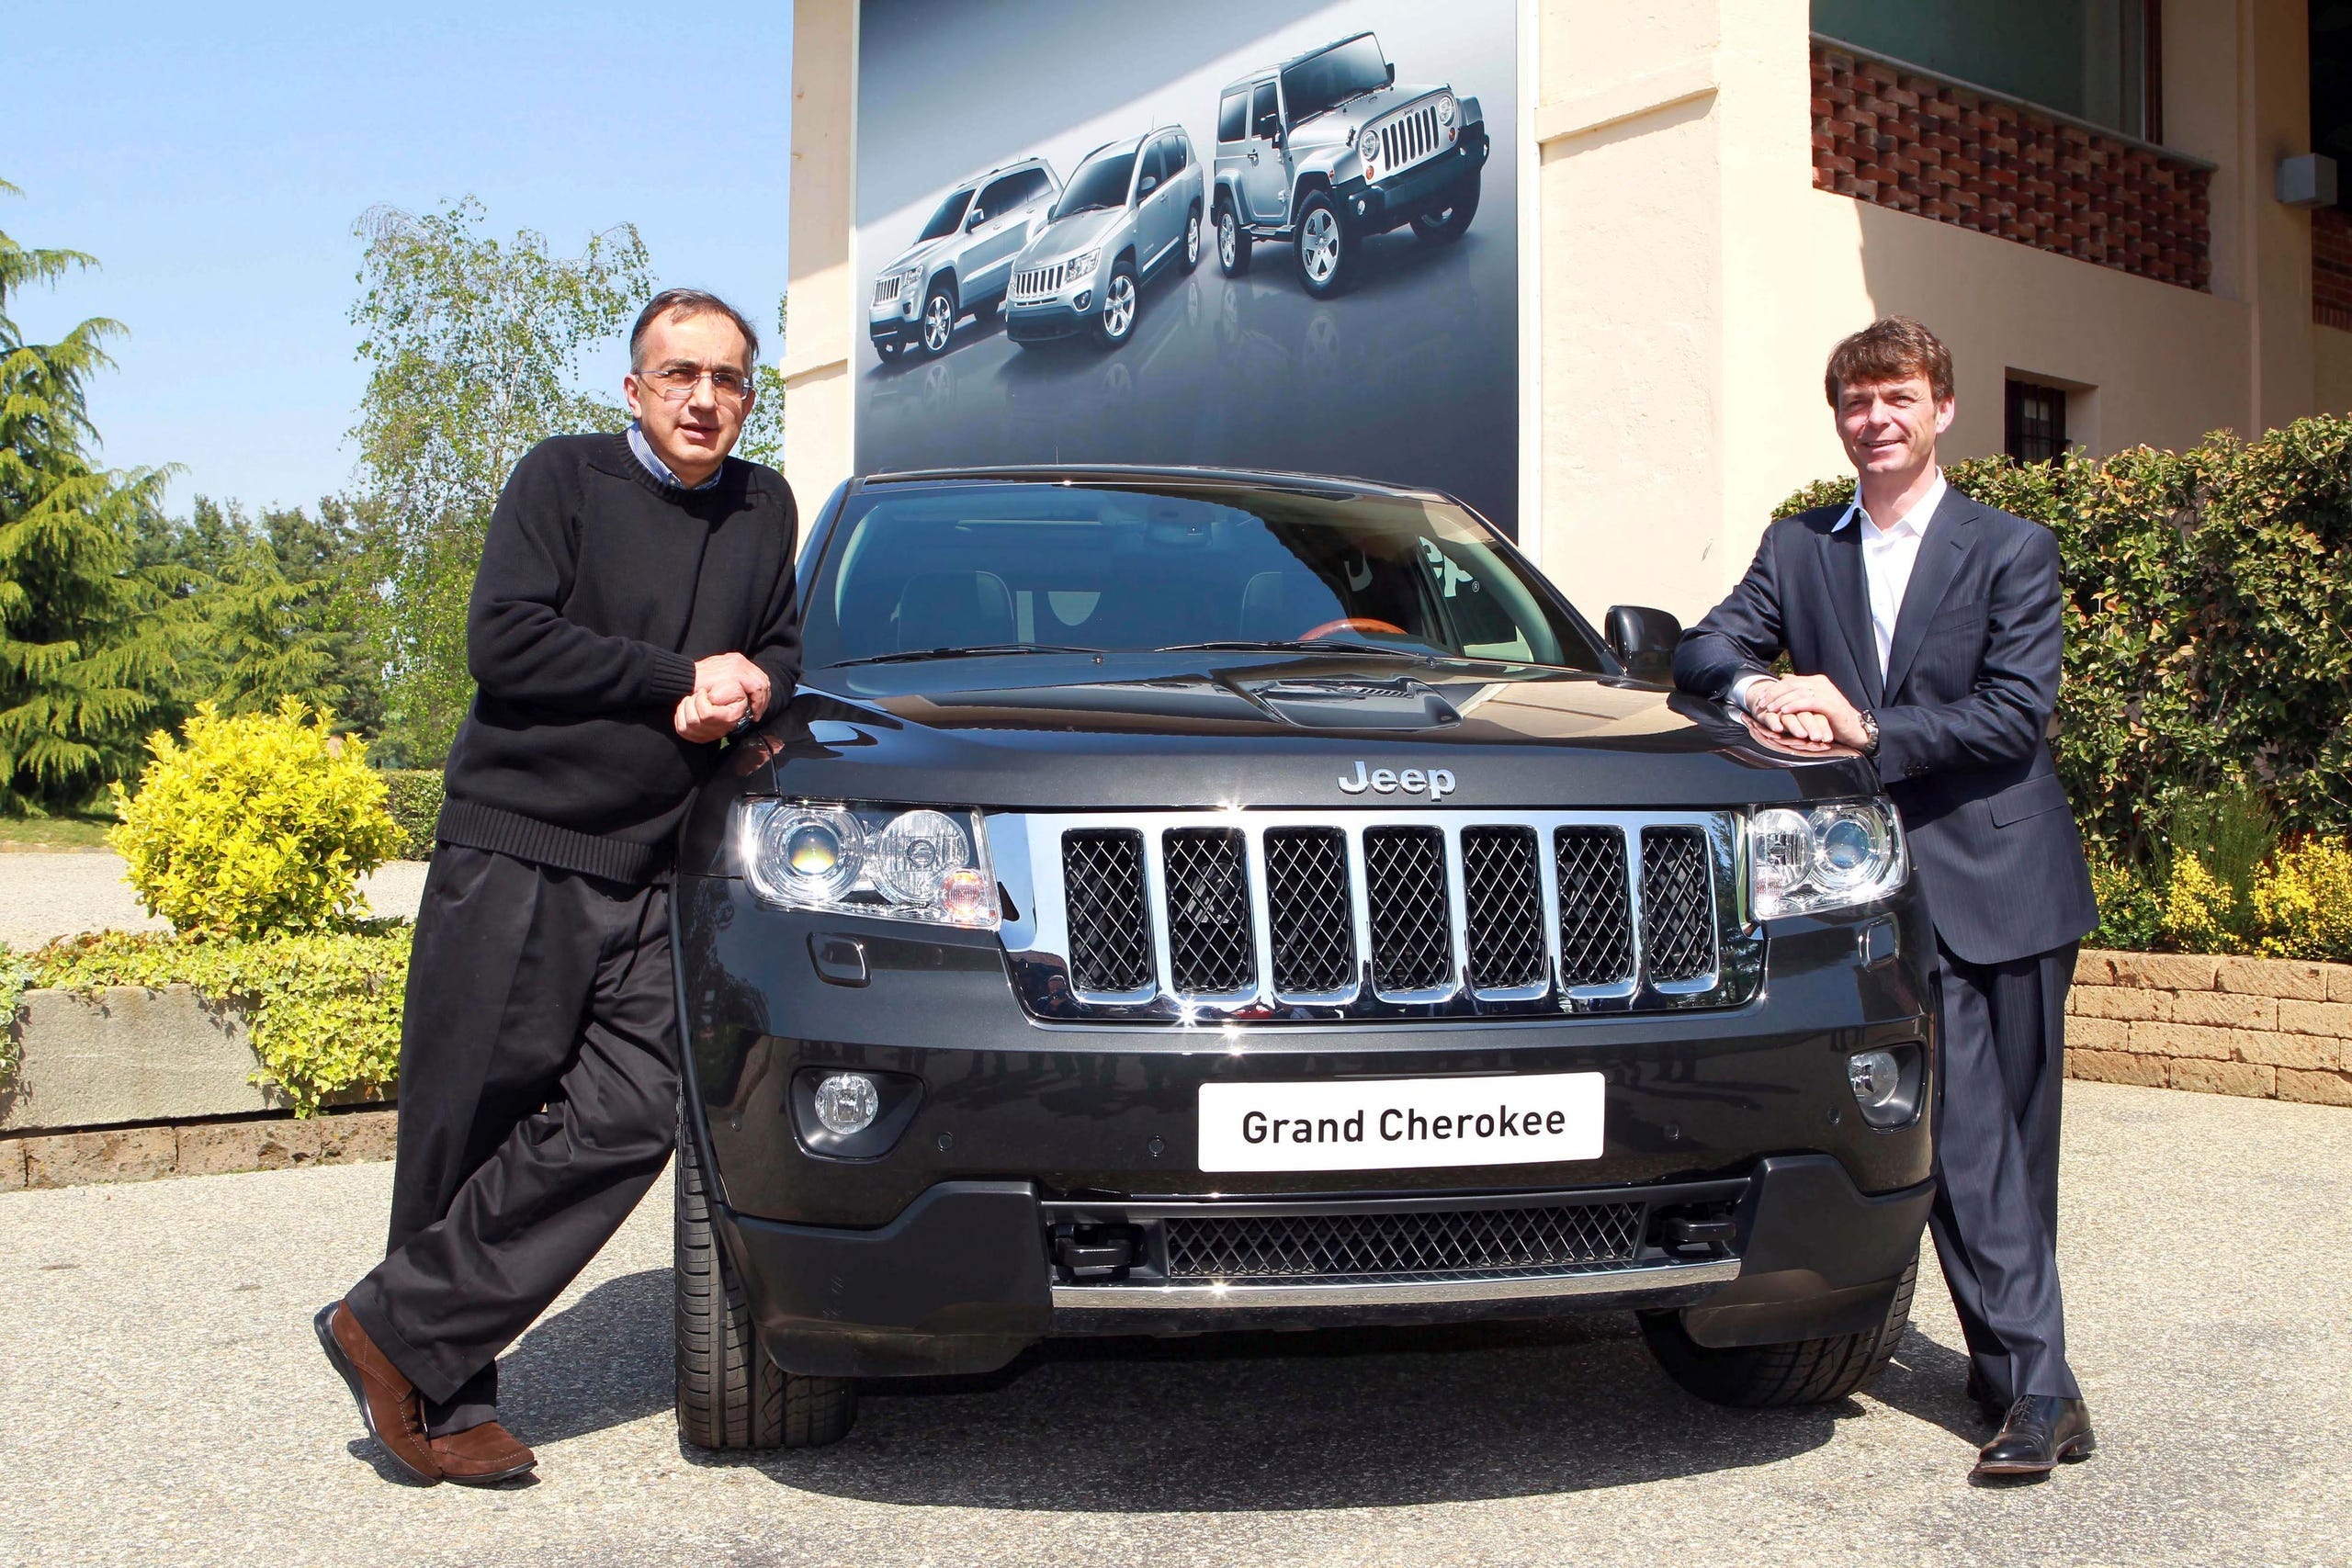 Fiat and Chrysler CEO Sergio Marchionne, left, poses with the new Jeep Grand Cherokee and Mike Manley, Jeep brand CEO, during a presentation near Turin, Italy, in 2011.